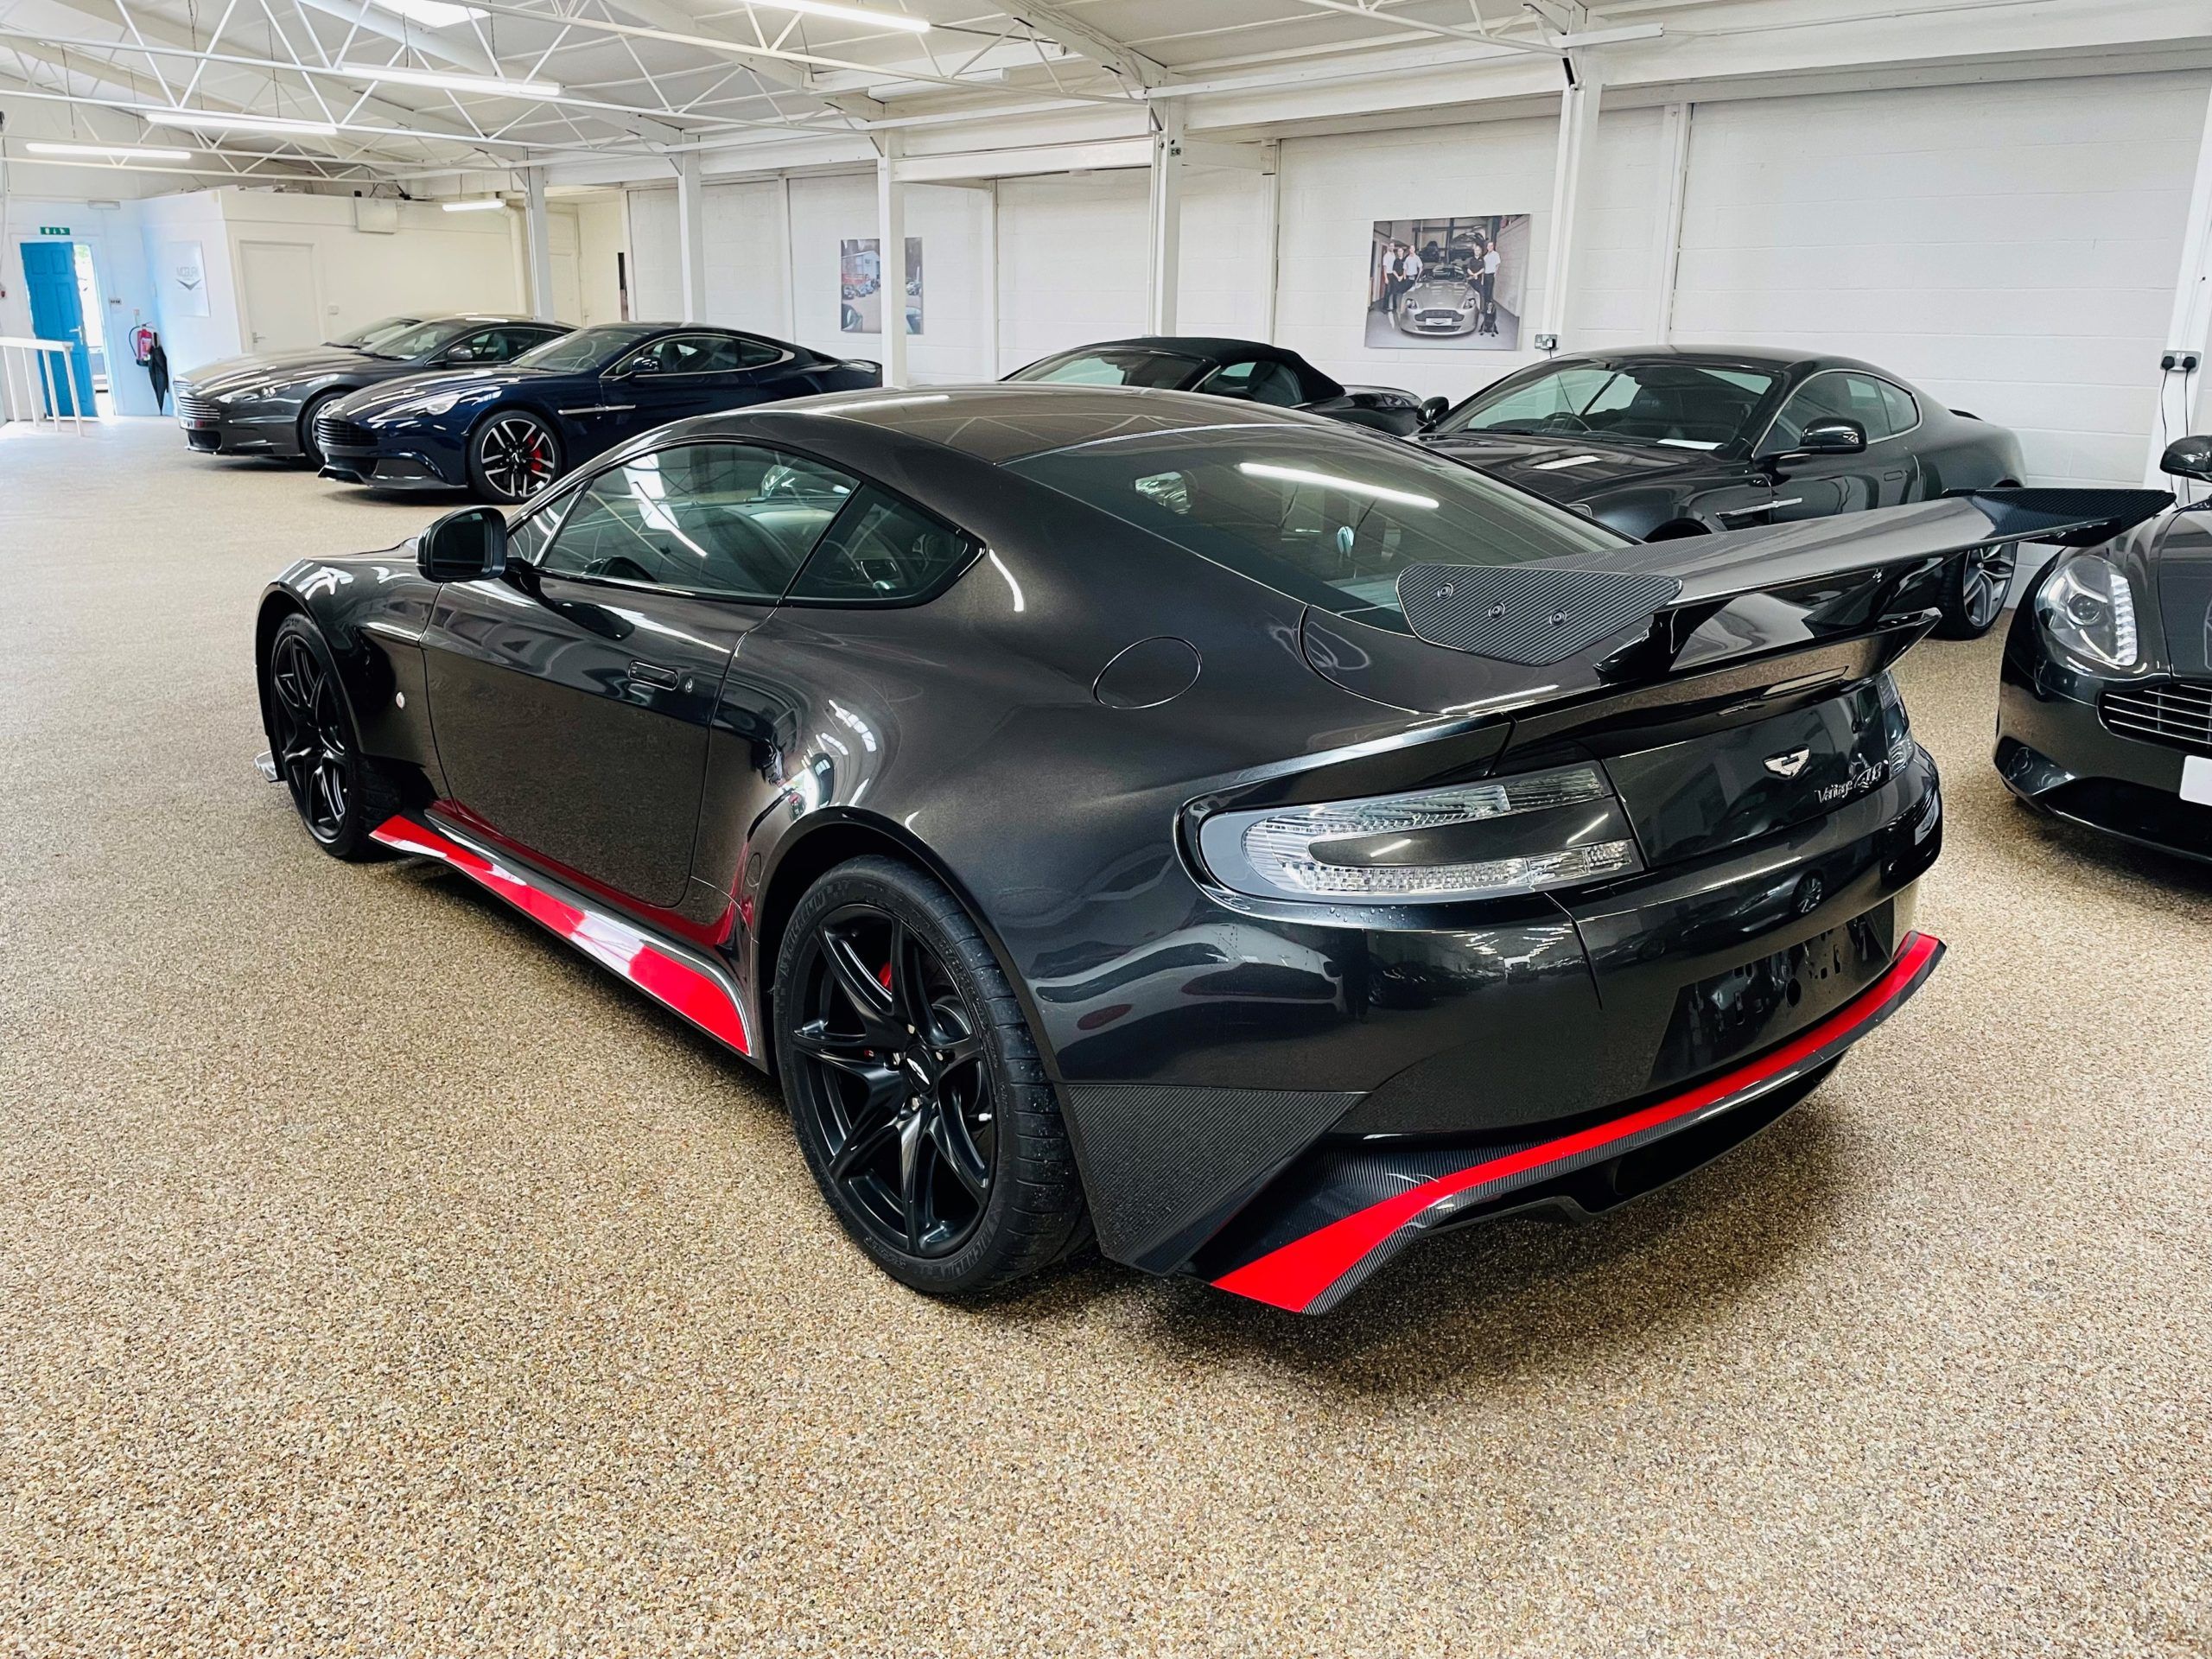 Aston MArtin GT8 for sale